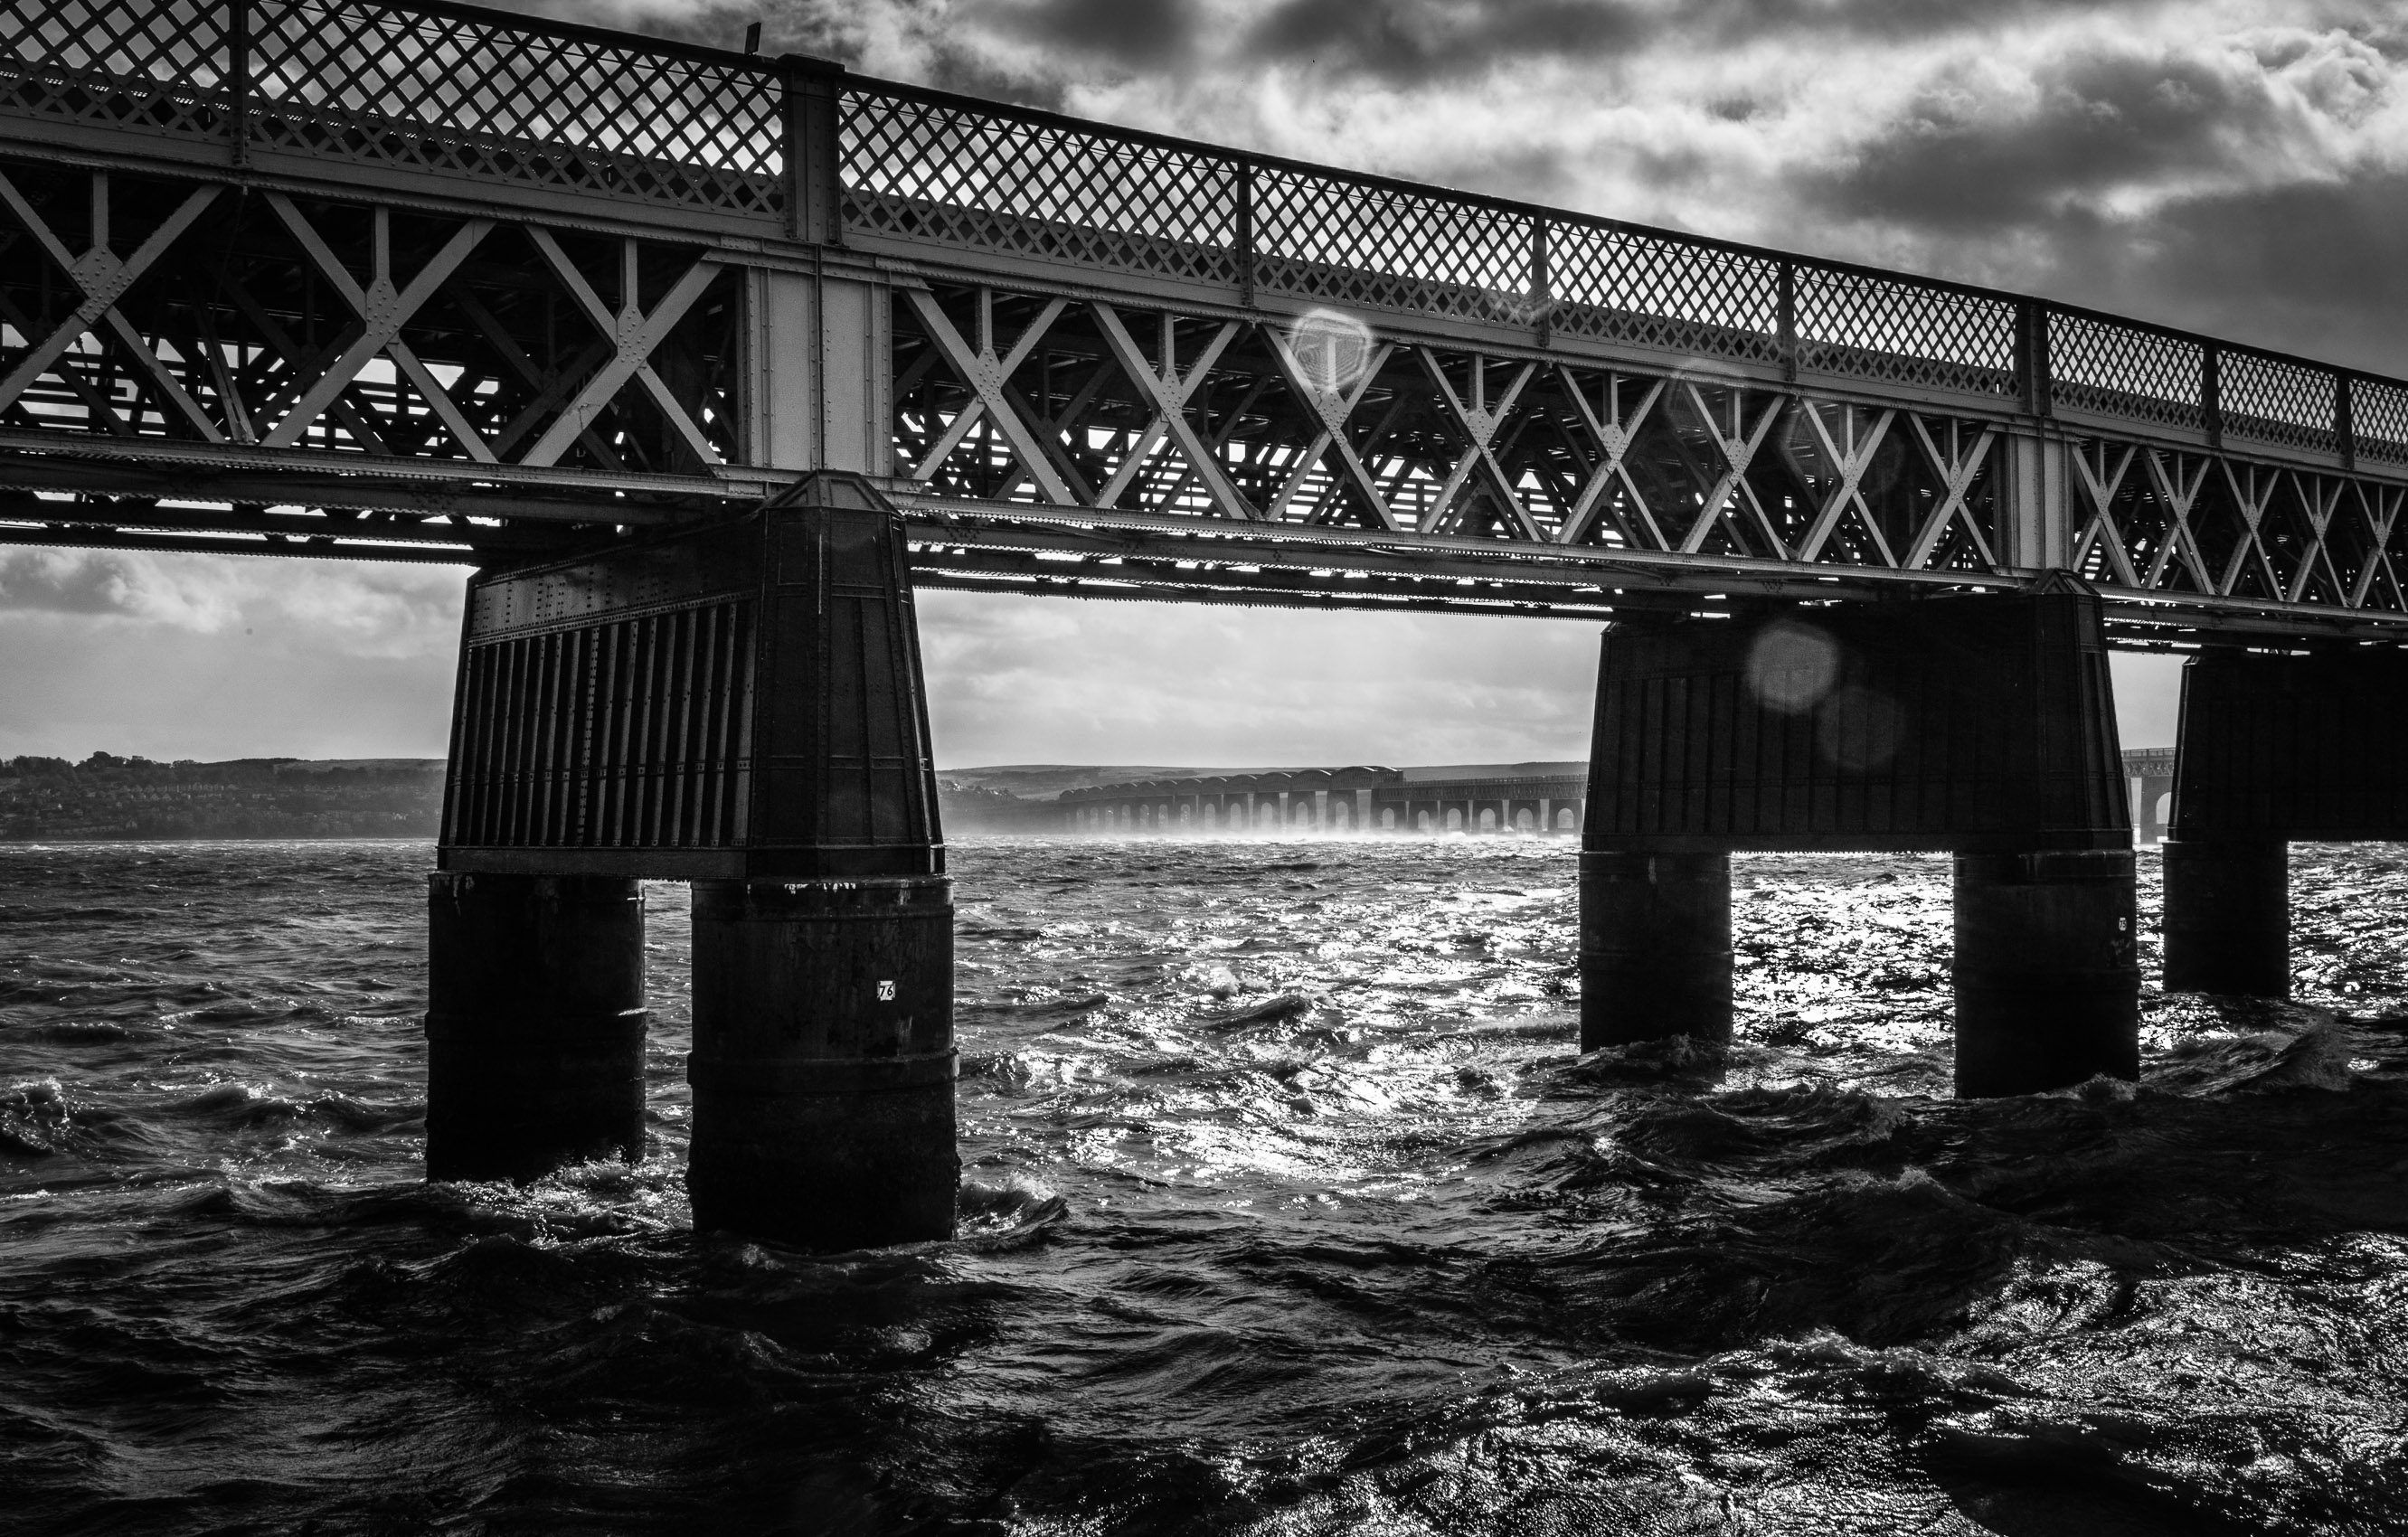 Rough water on the Firth of Tay by the Tay Rail Bridge, Dundee, Scotland, United Kingdom. the Firth of Tay around the Tay Rail Bridge, Dundee, Scotland. DD026